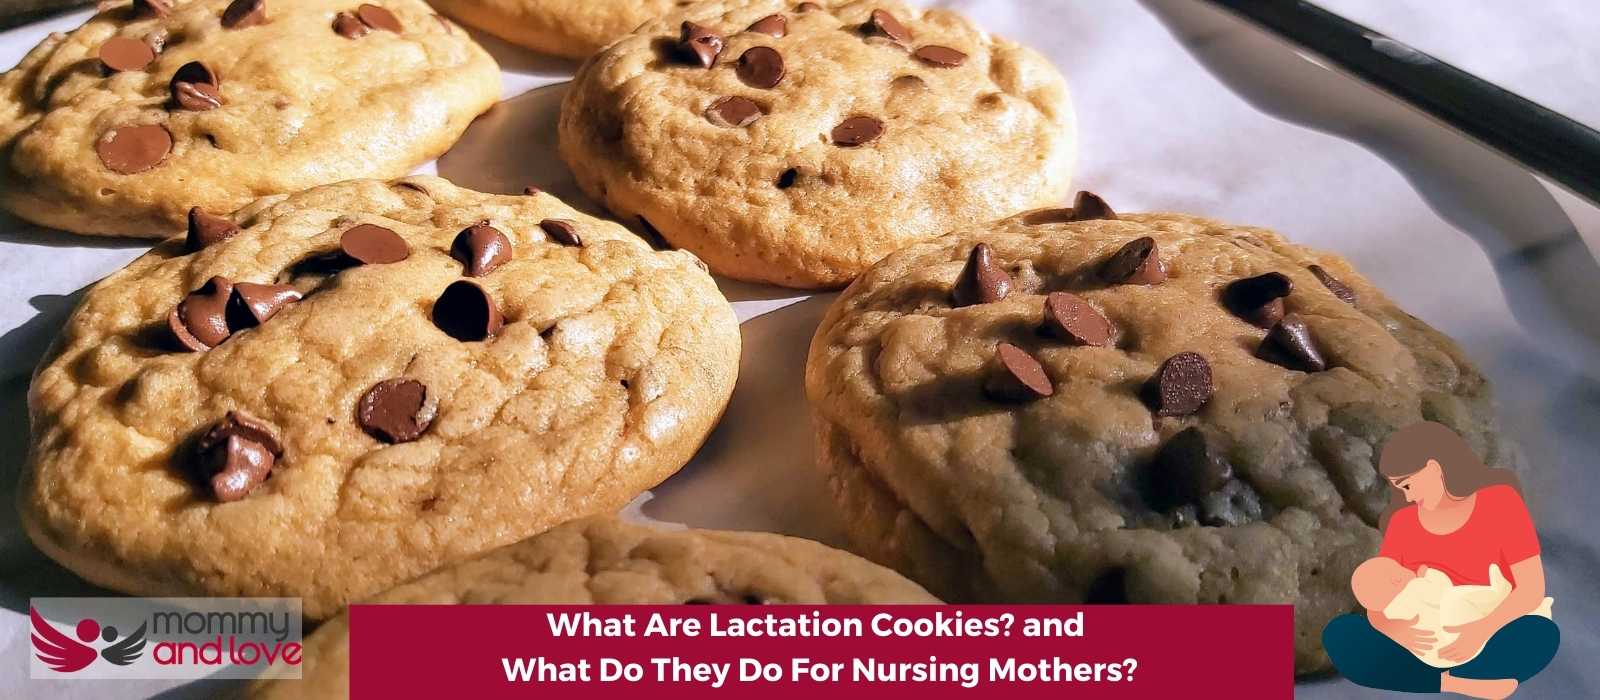 What Are Lactation Cookies and What Do They Do For Nursing Mothers